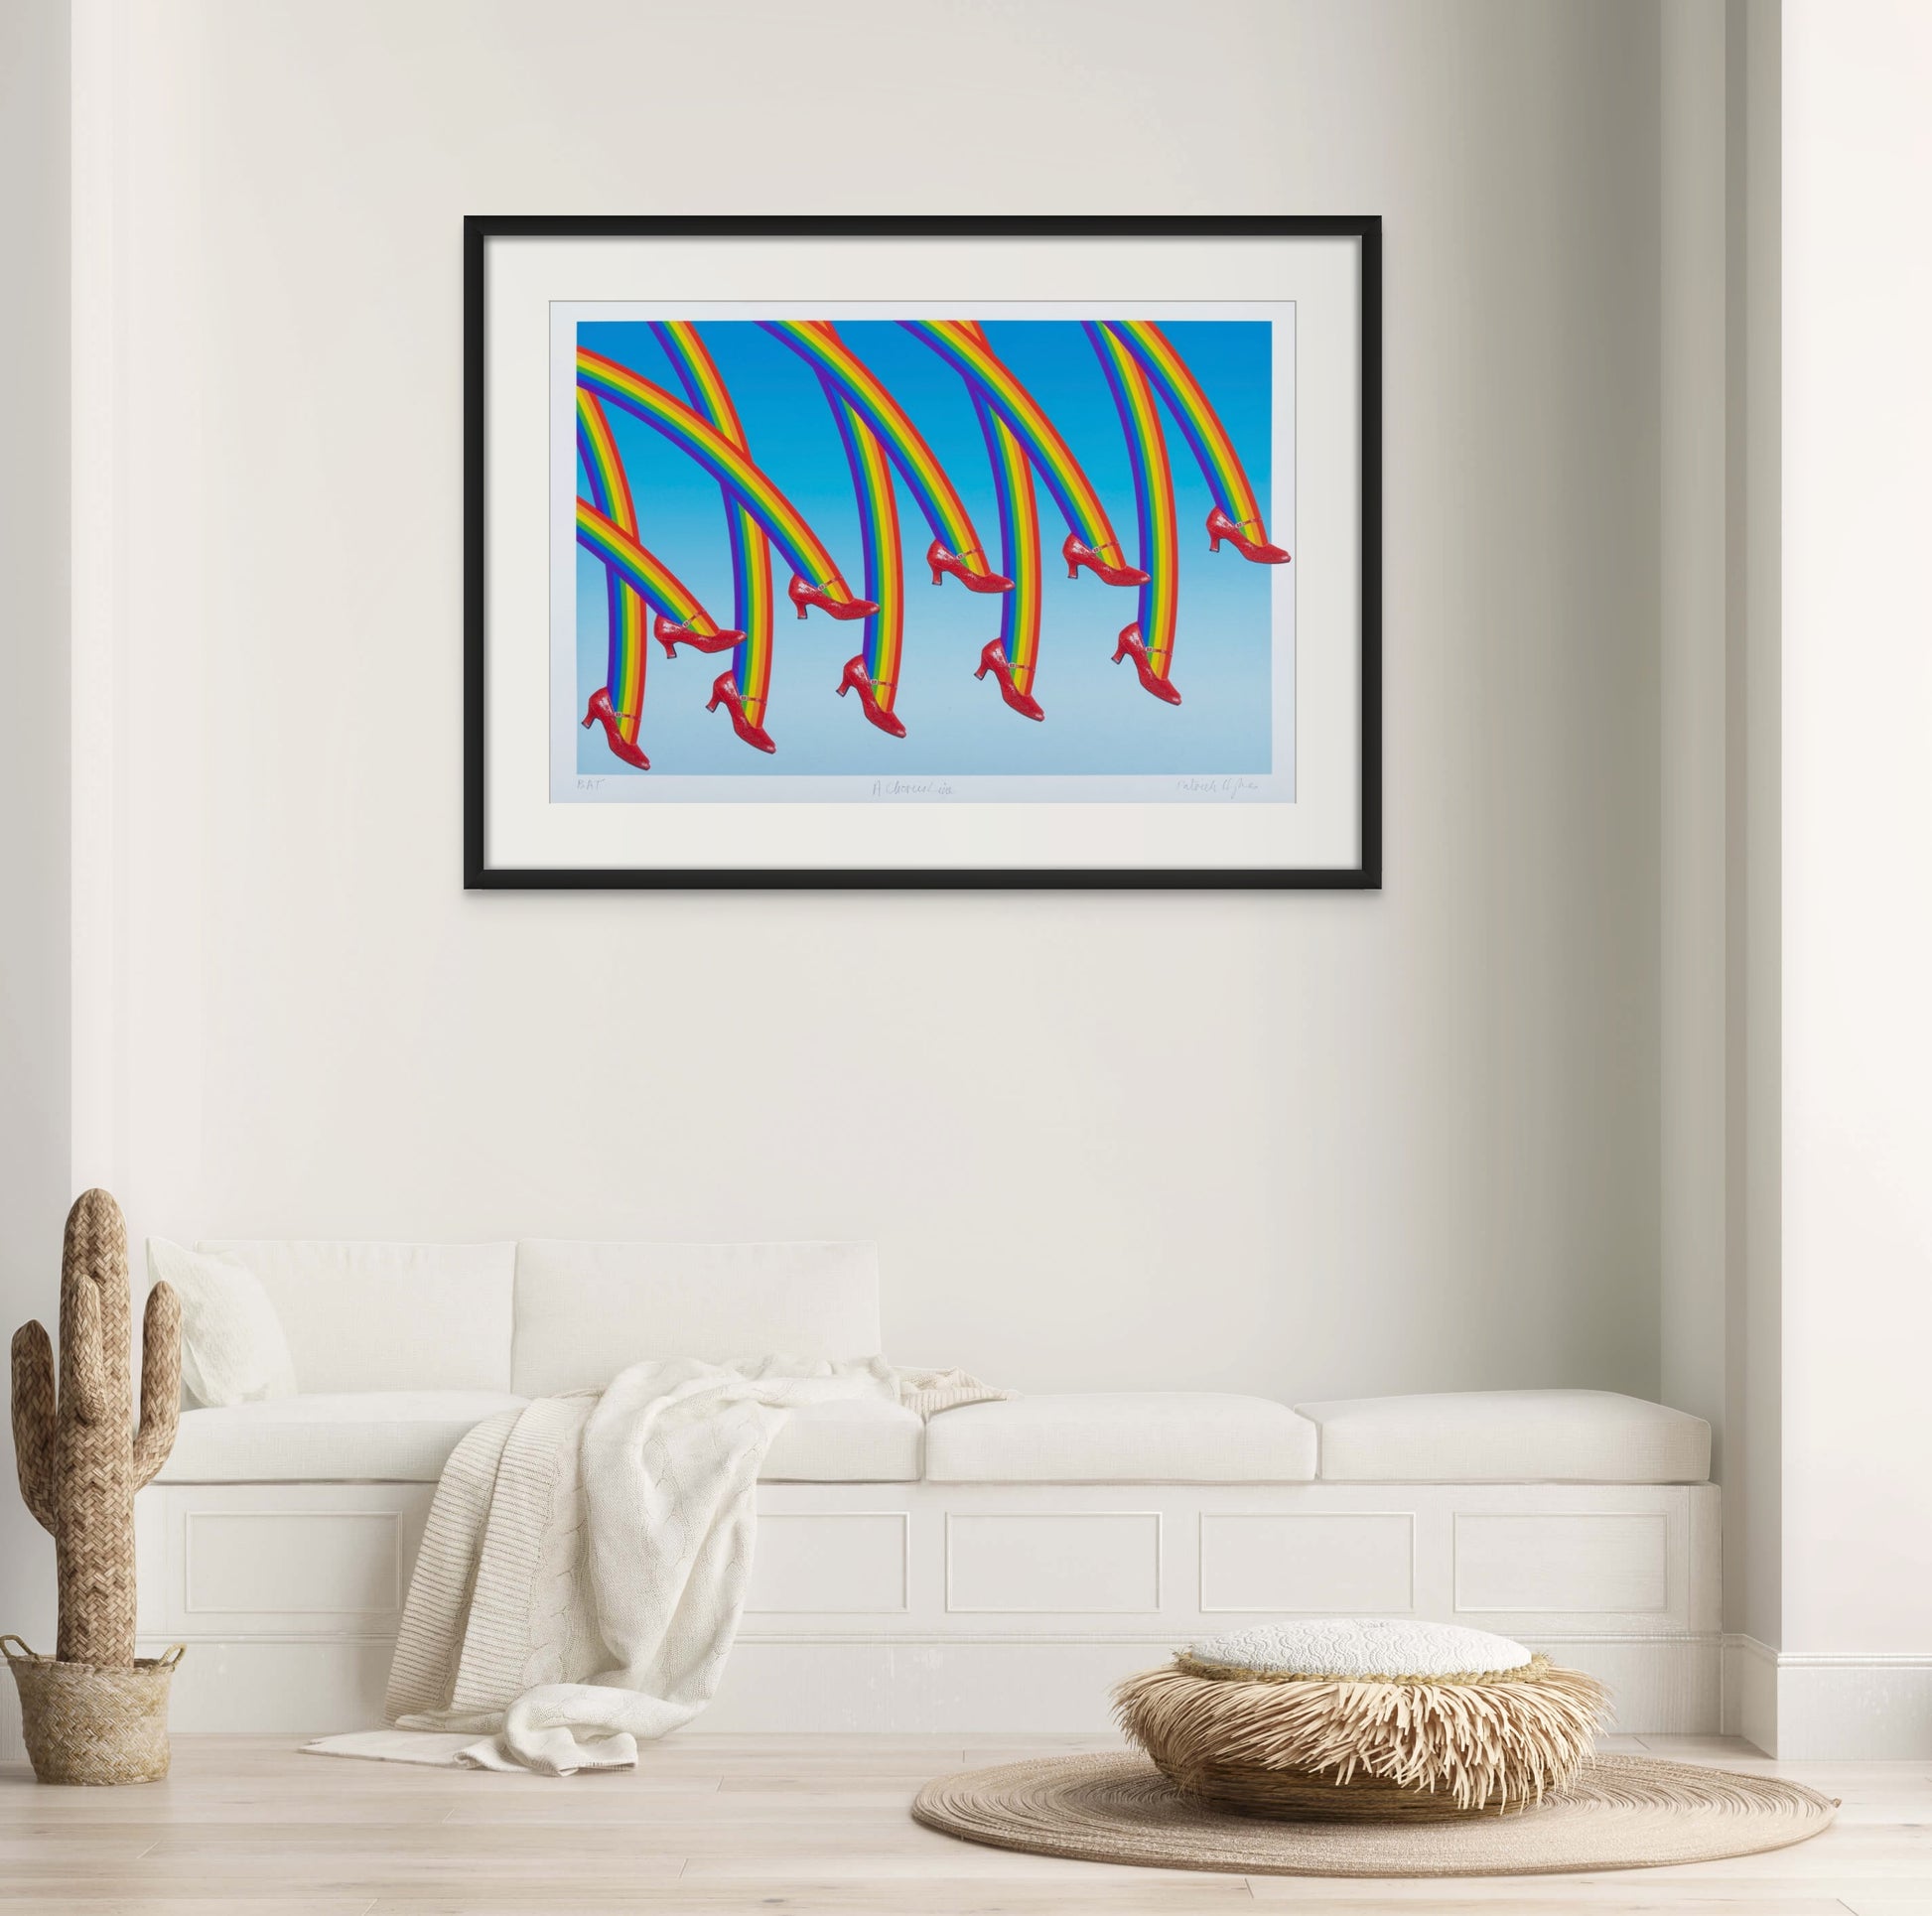 Specially created for Bridgeman Editions, this archival digital print on Hahnemühle German etching paper features an A2 paper size. Authorised and certified by Patrick Hughes, this artwork offers vibrant colours and dynamic rainbow shapes in a chorus line theme. Comes with a sleek black frame for easy display